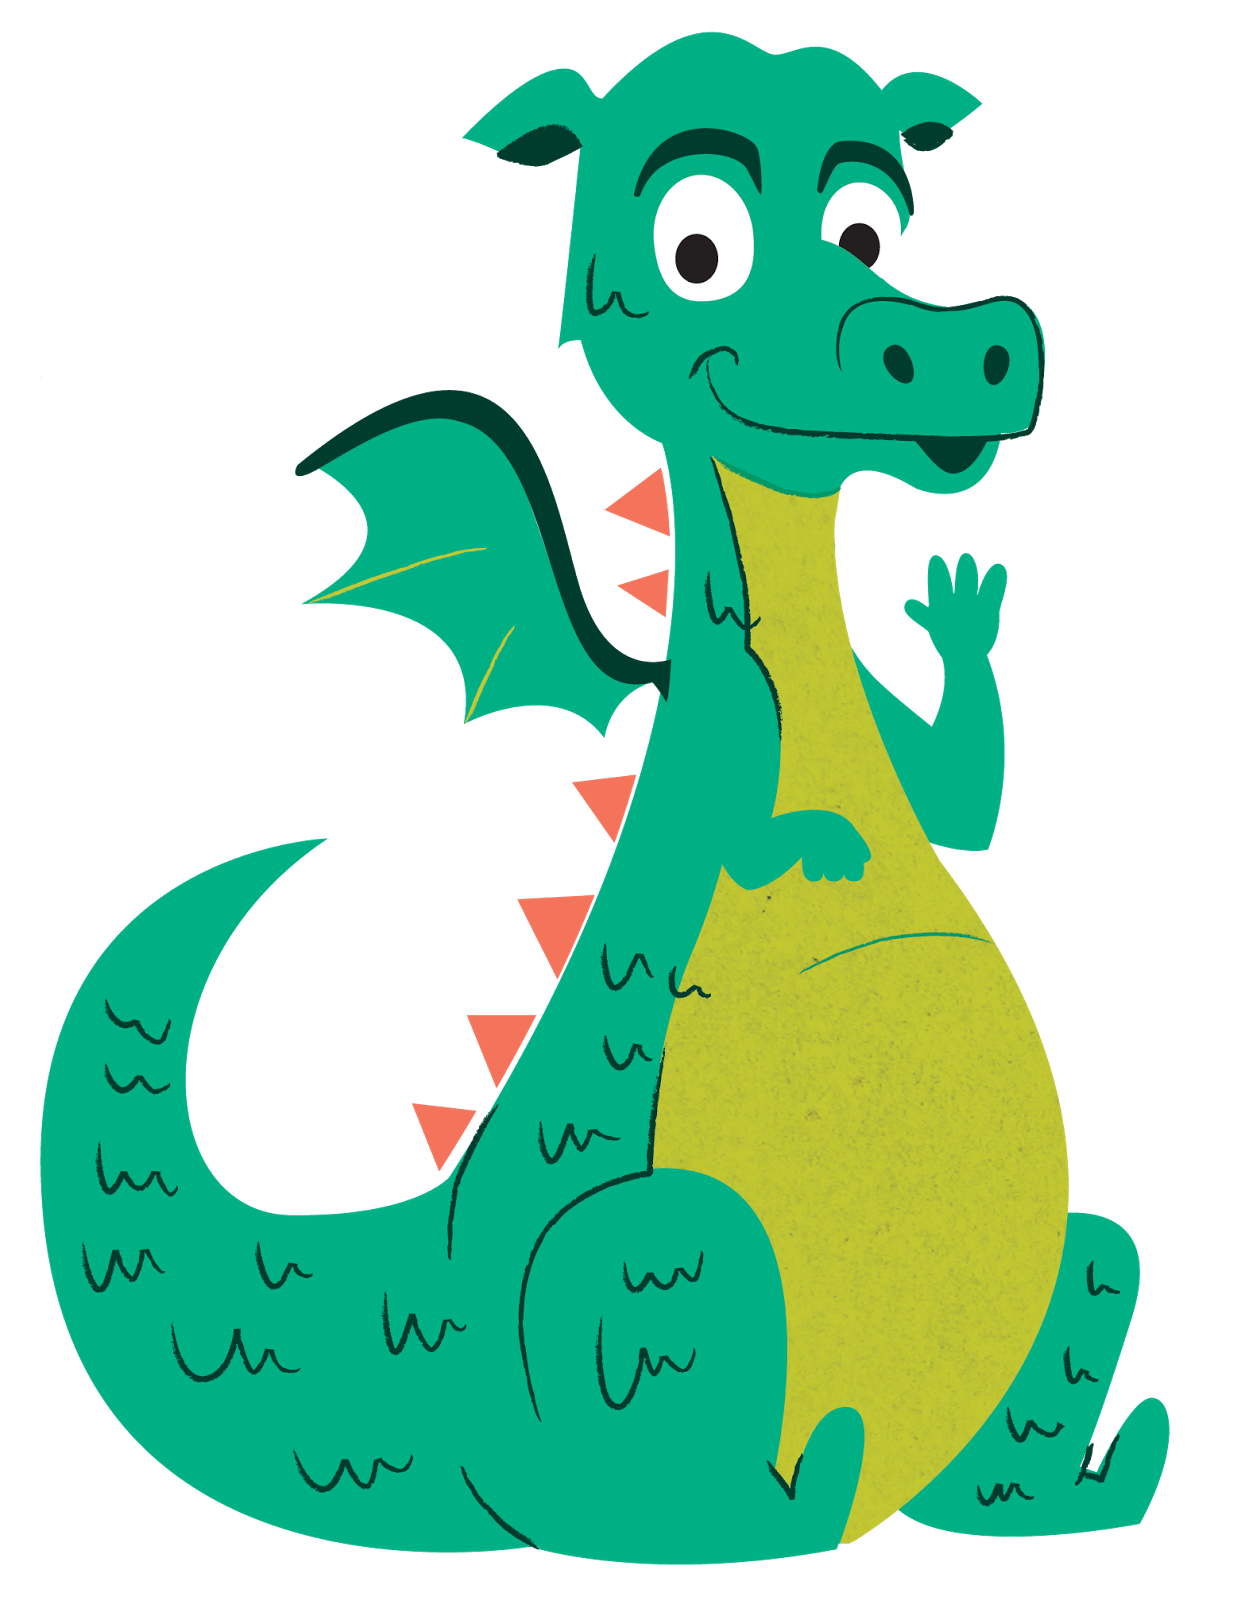 Dragon Pictures For Children | Free Download Clip Art | Free Clip ...